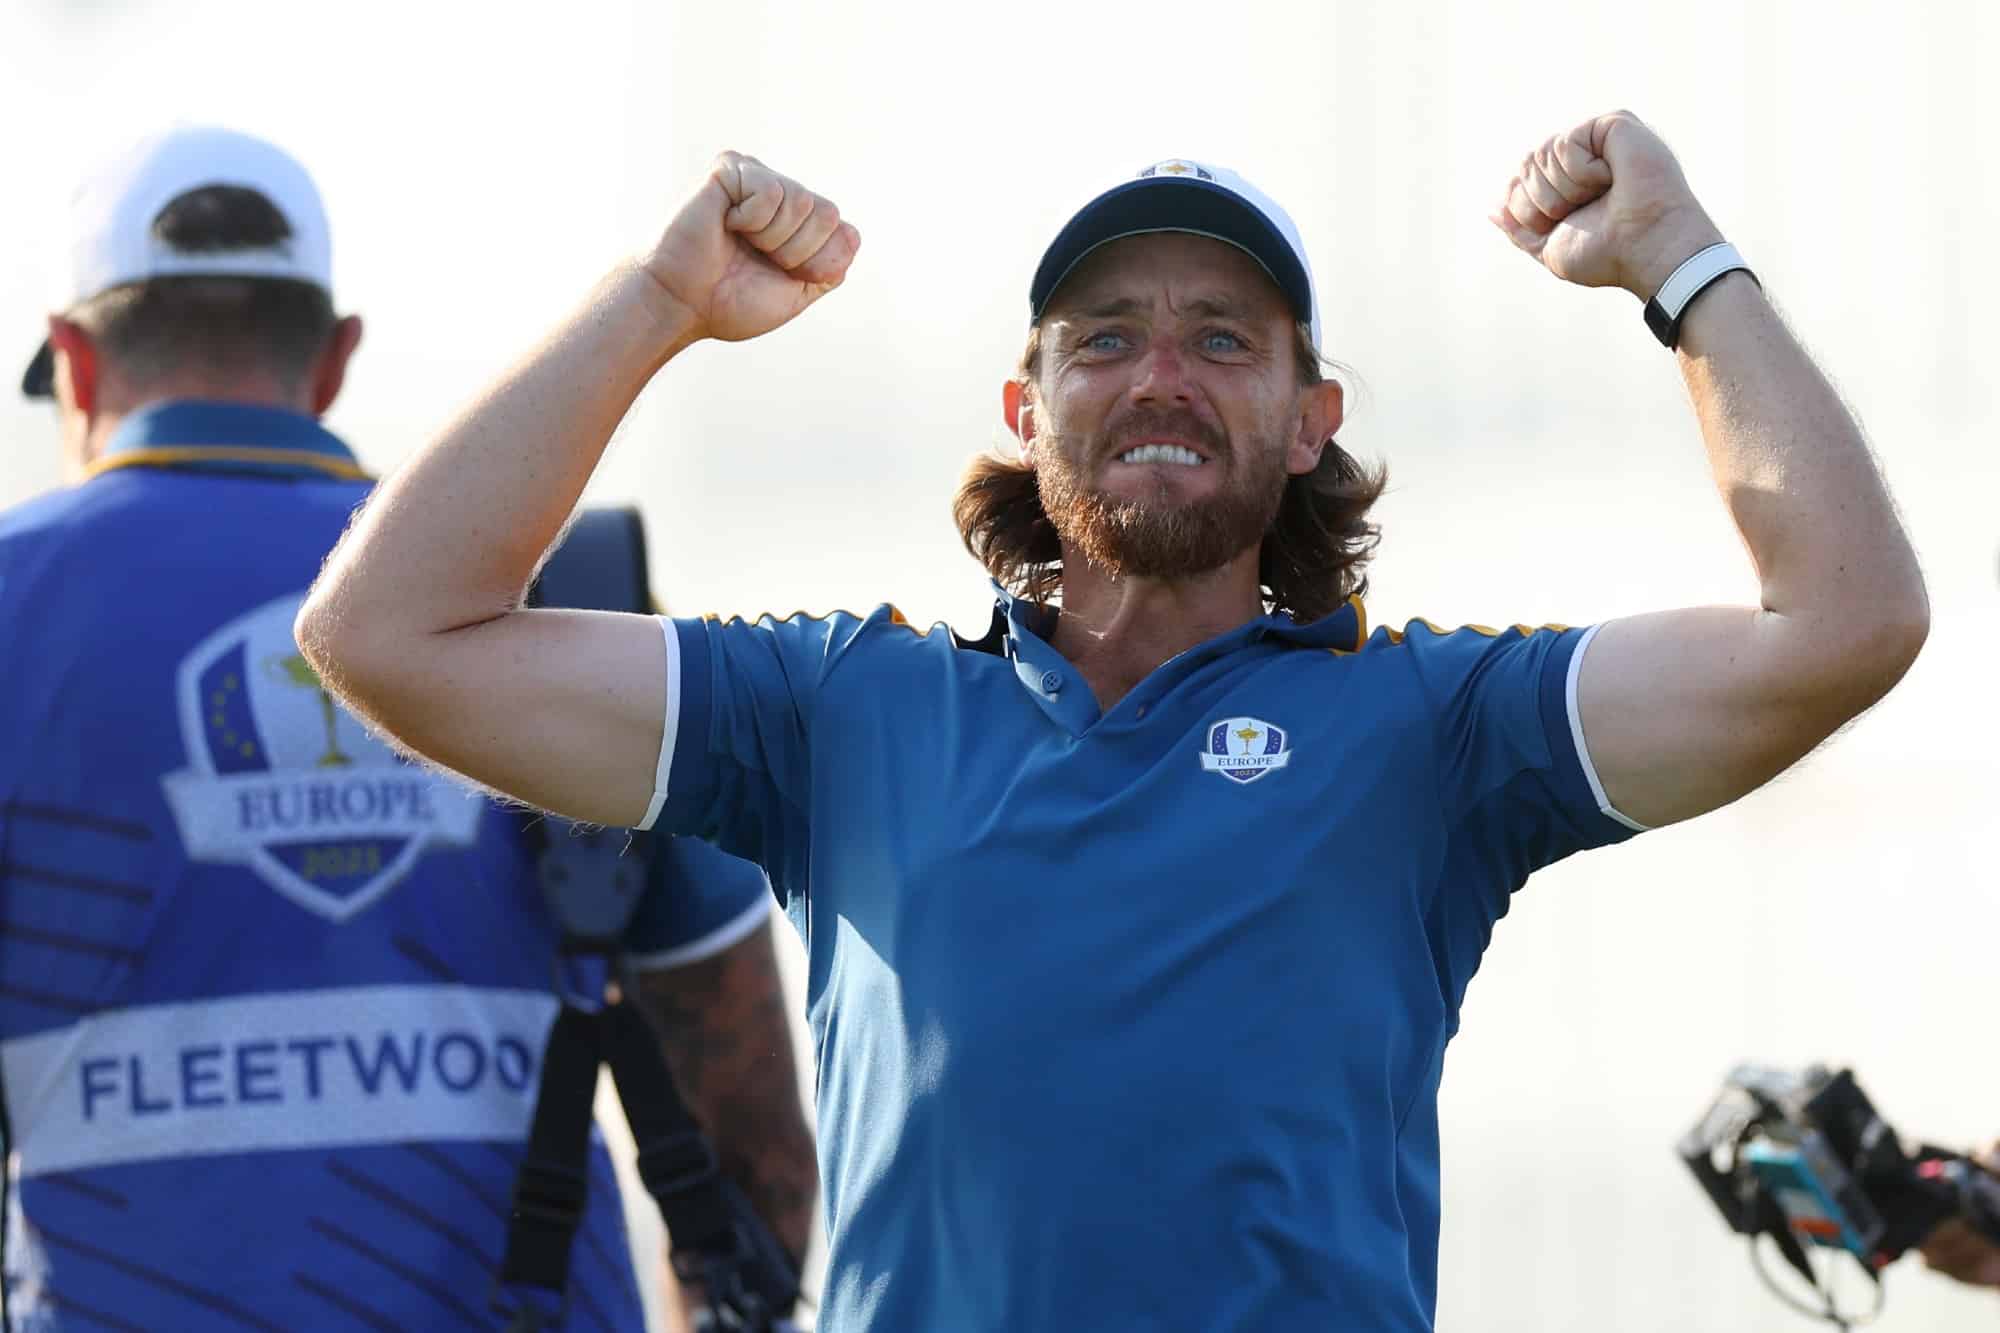 Europe win ryder cup